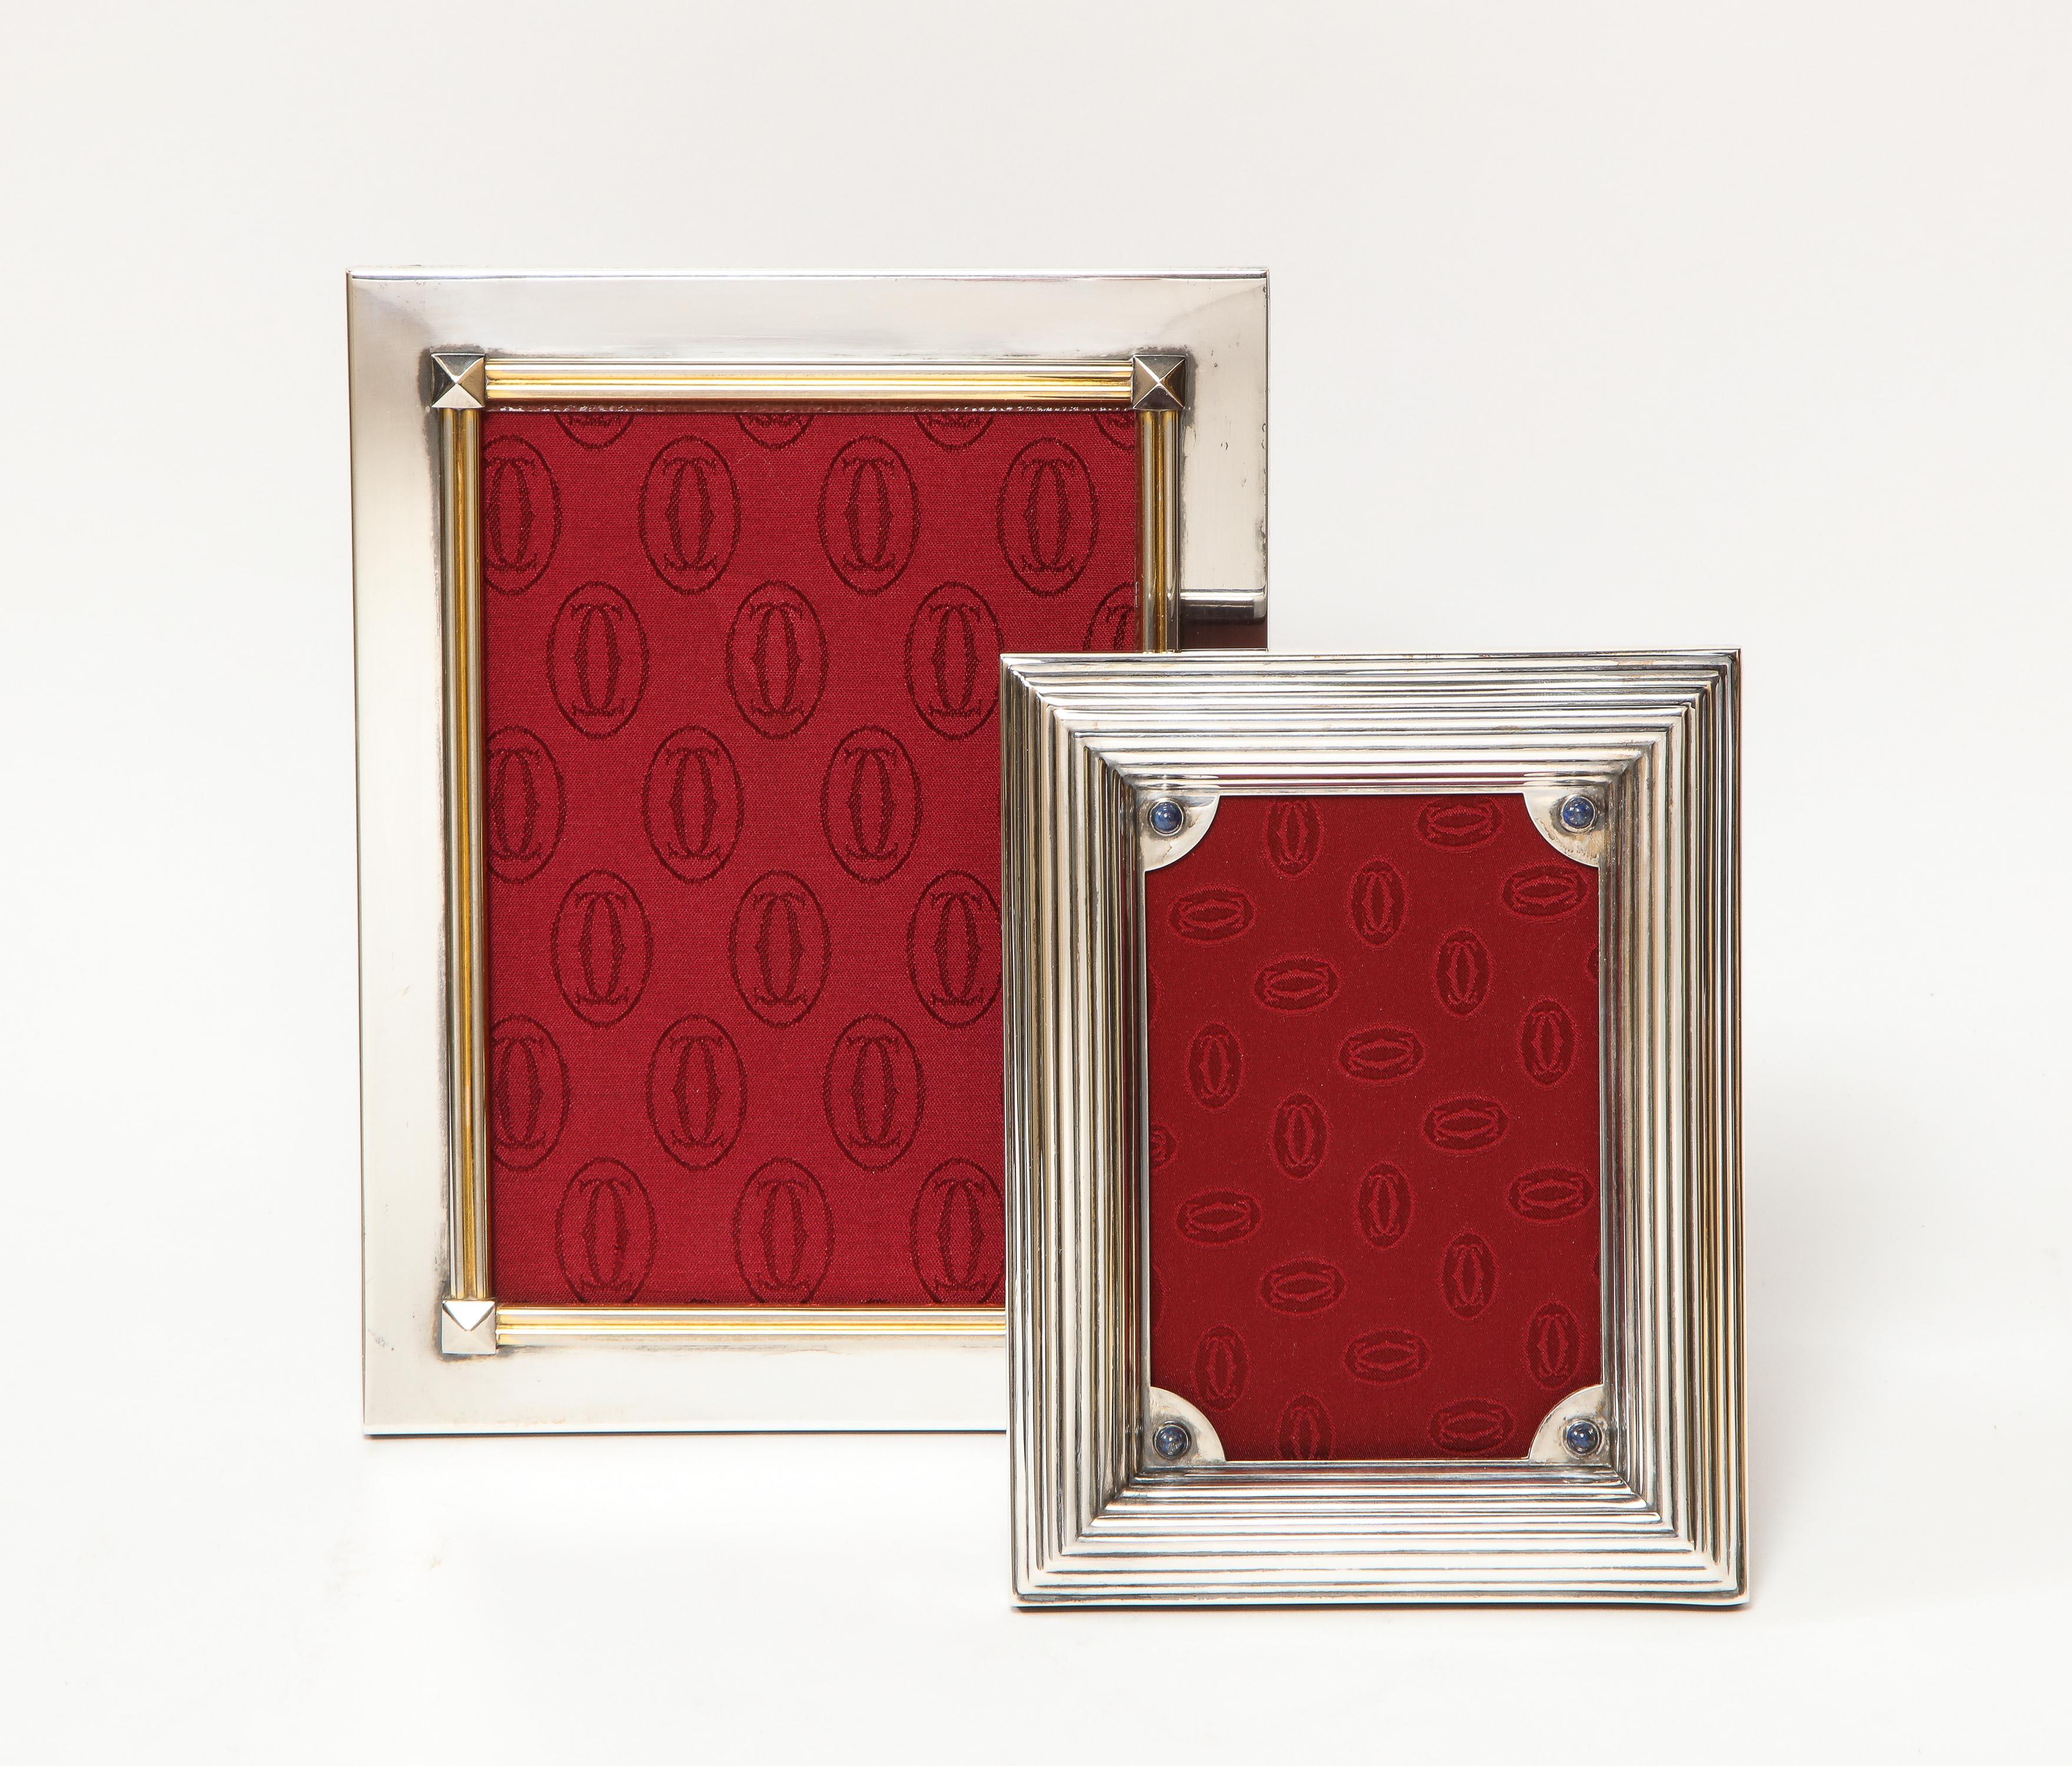 Two Cartier silvered metal picture frames, 20th century.

The smaller one with lapis beads and the larger one with gilt border.

Smaller frame overall: 7.5